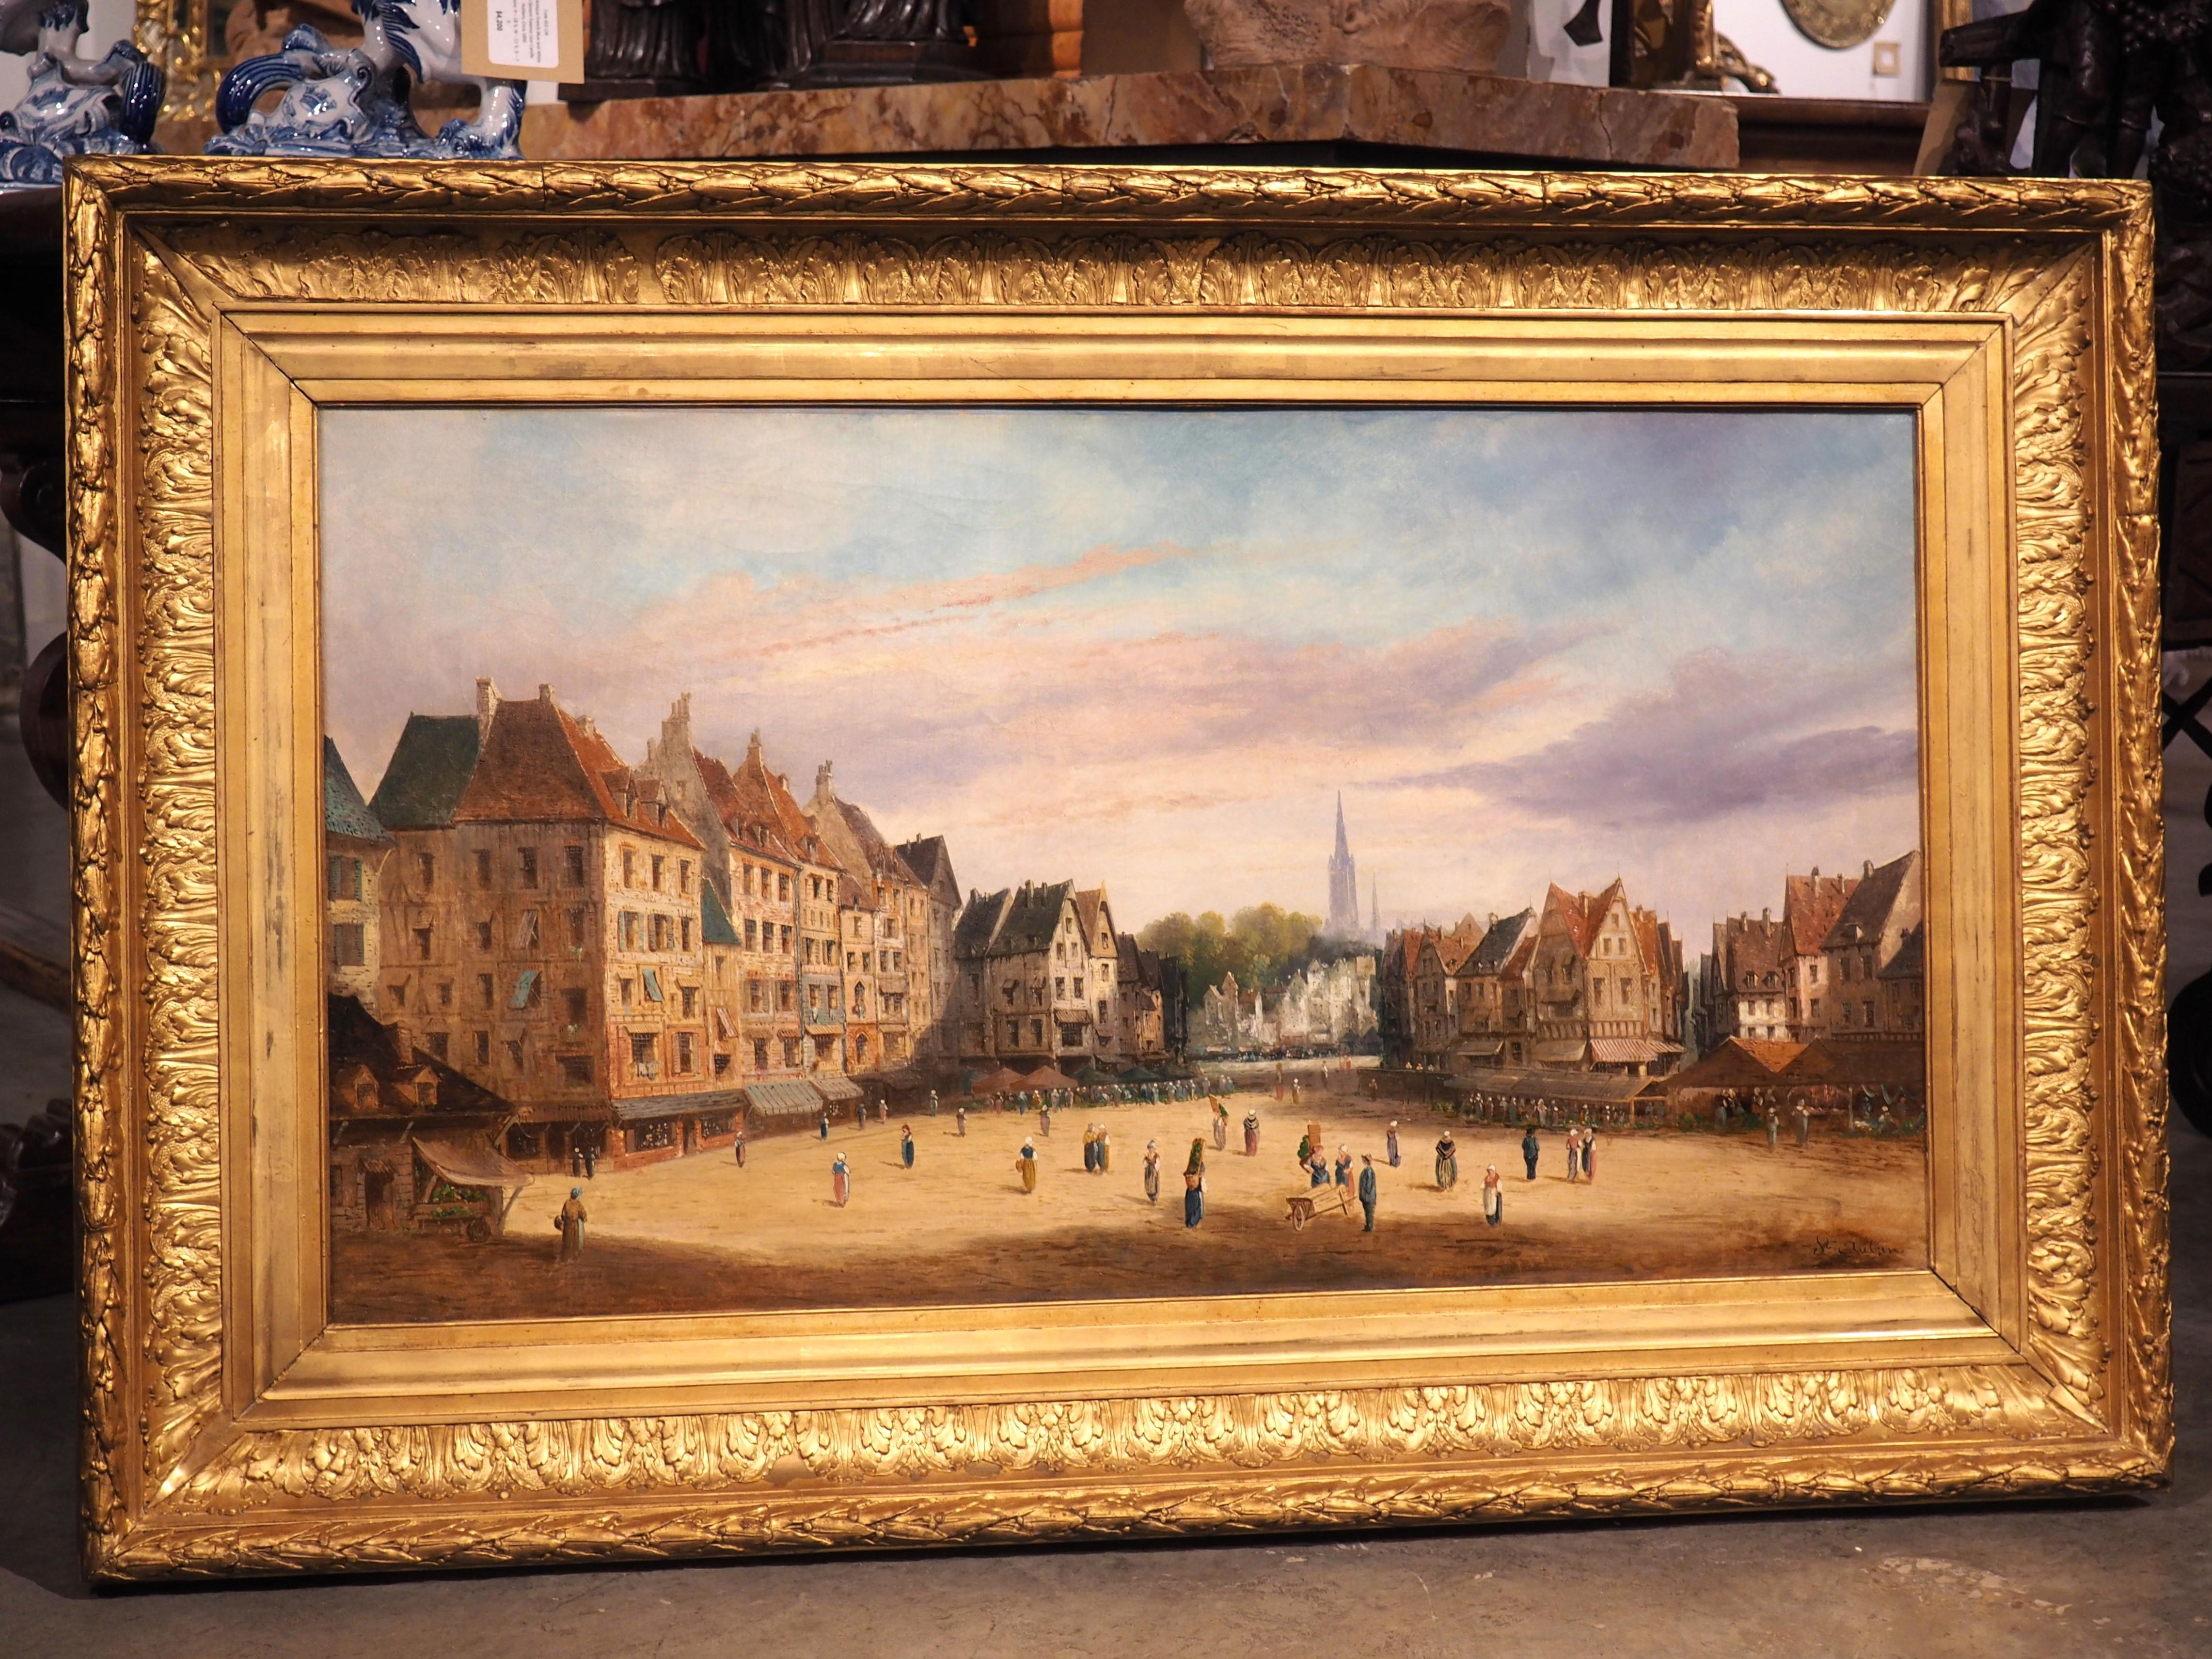 Our captivating and large oil painting in a giltwood frame (49.5 inches) is a snapshot of life in France during the 1800s. The artist (St Aubin, signed in the lower right corner) successfully depicts the bustling town. A peaceful portrayal of a